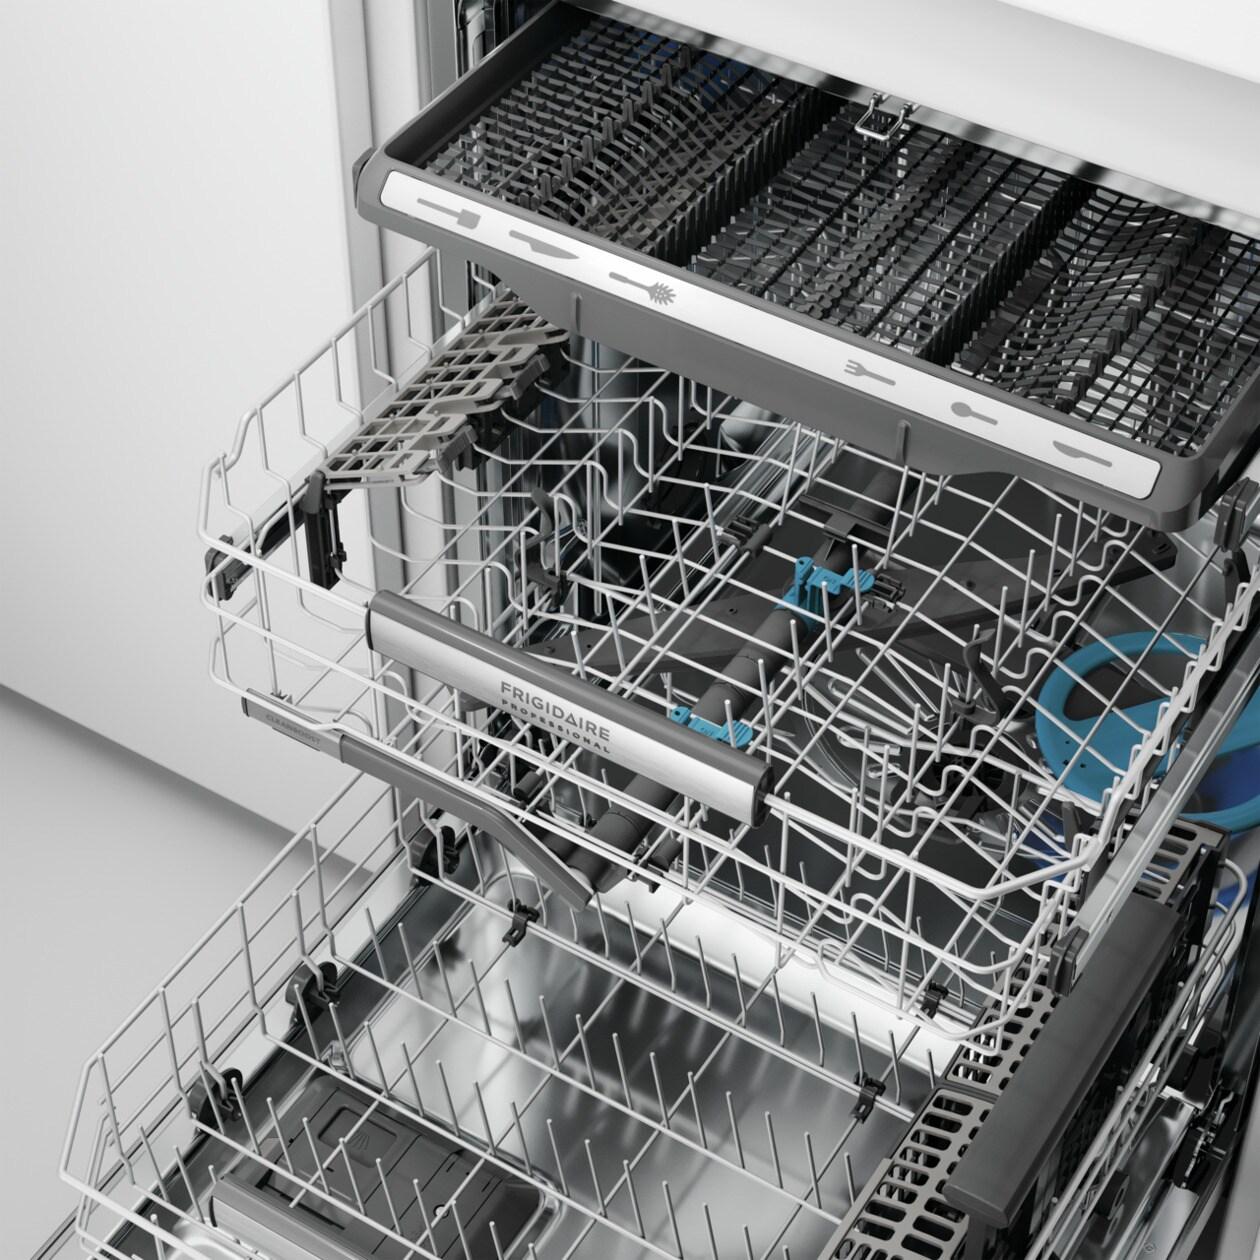 Frigidaire PDSH4816AF Frigidaire Professional 24" Stainless Steel Tub Built-In Dishwasher With Cleanboost&#8482;